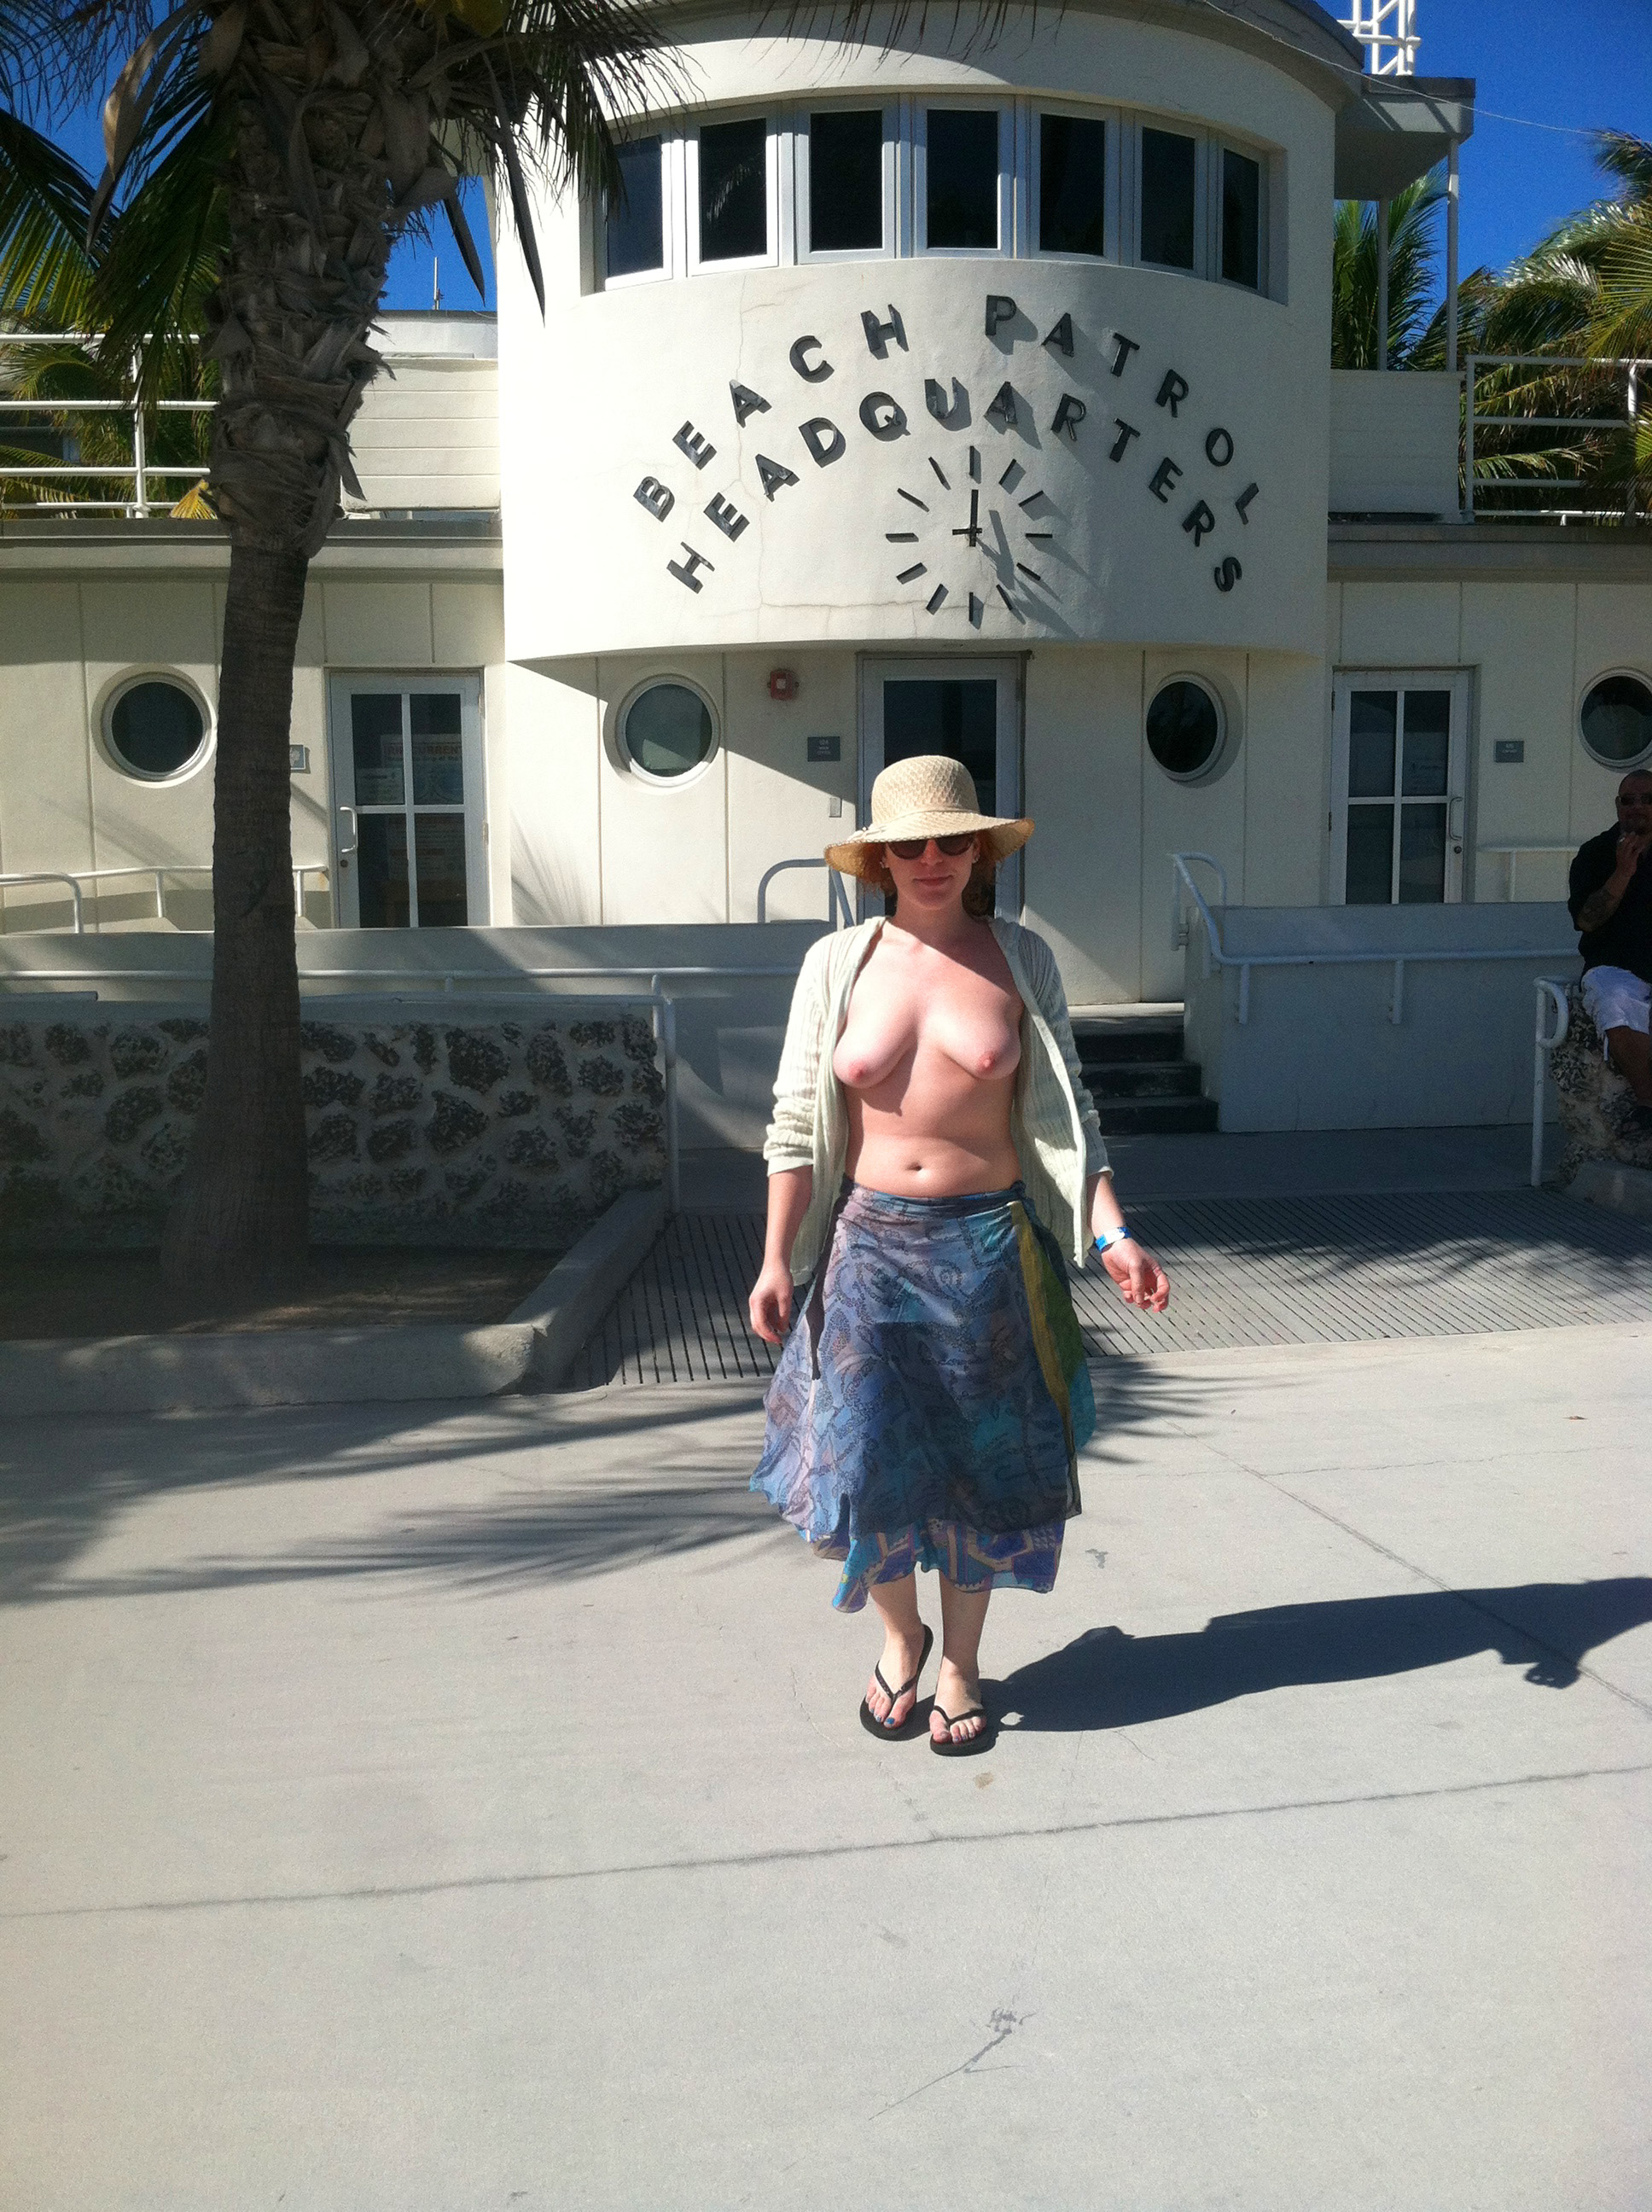 I Went Bare-chested in South Beach The